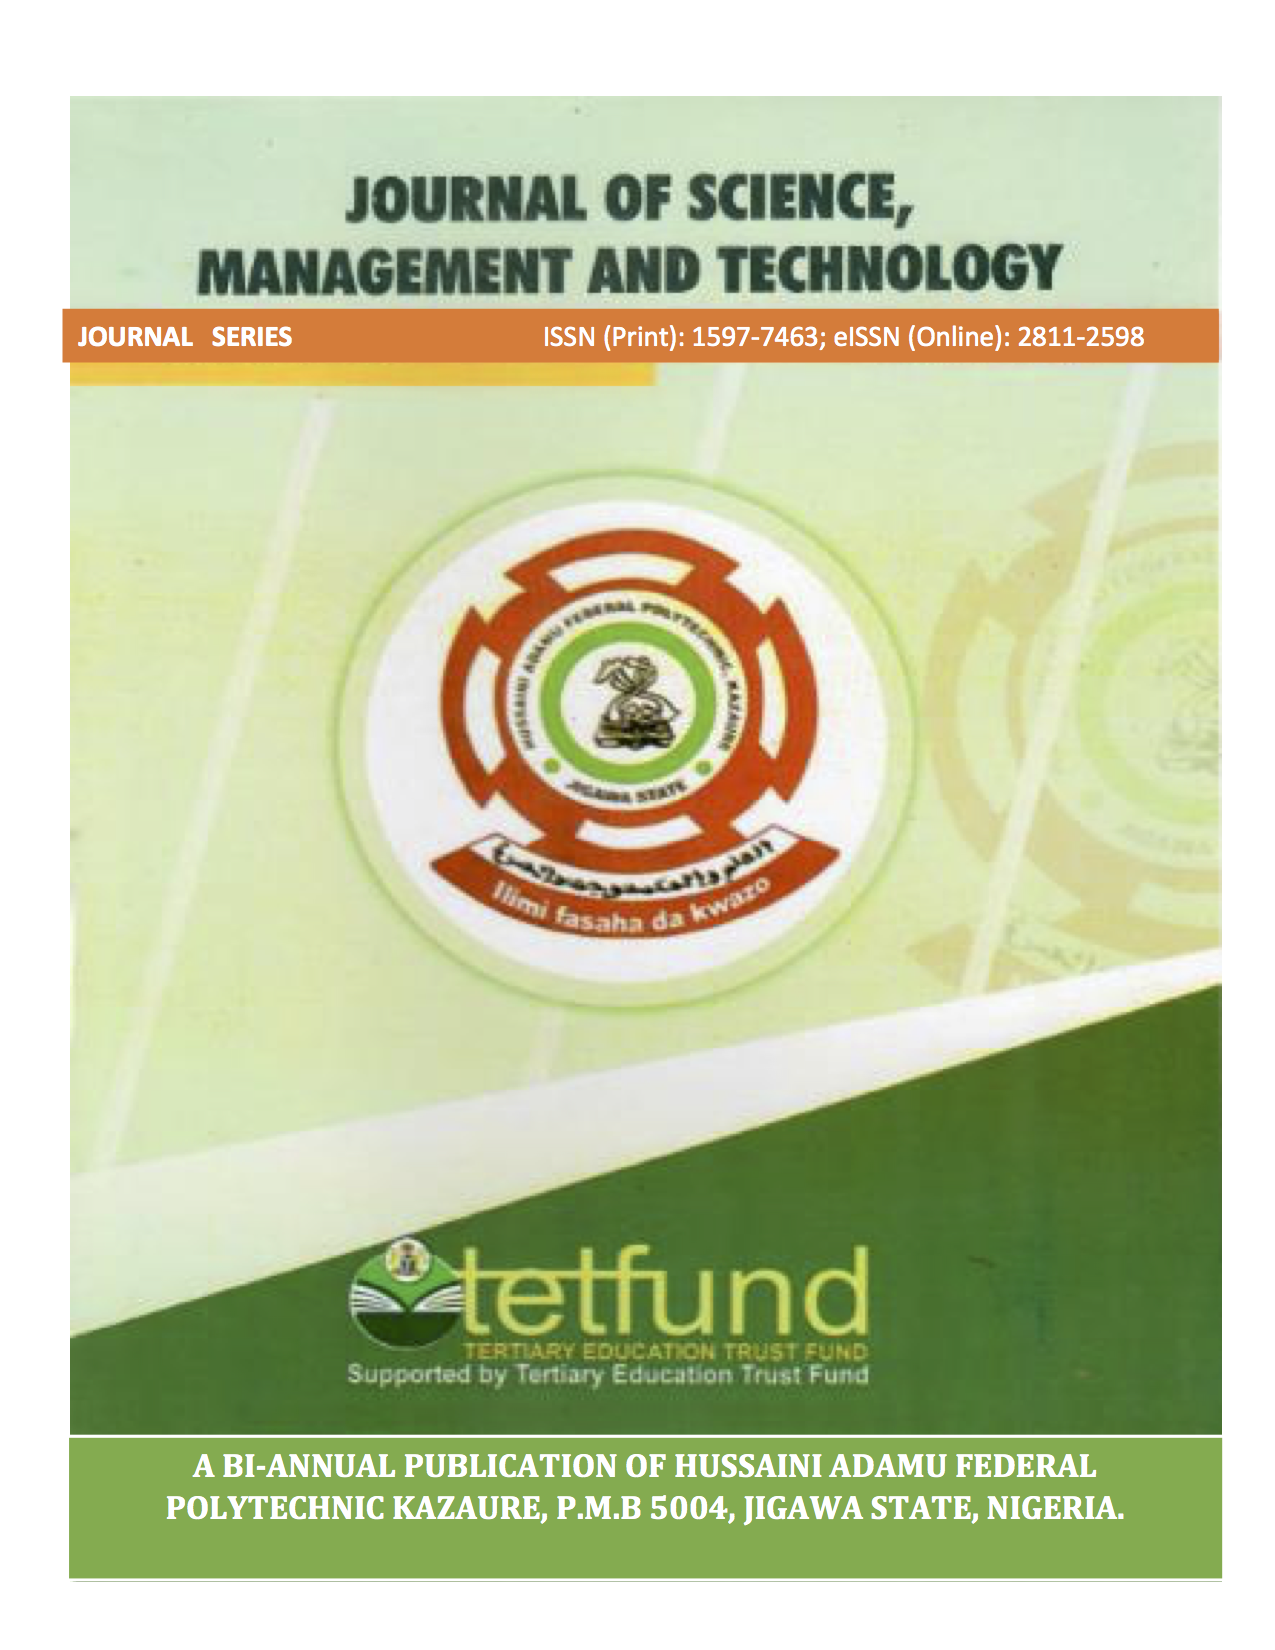 HAFED POLY Journal of Science, Management and Technology